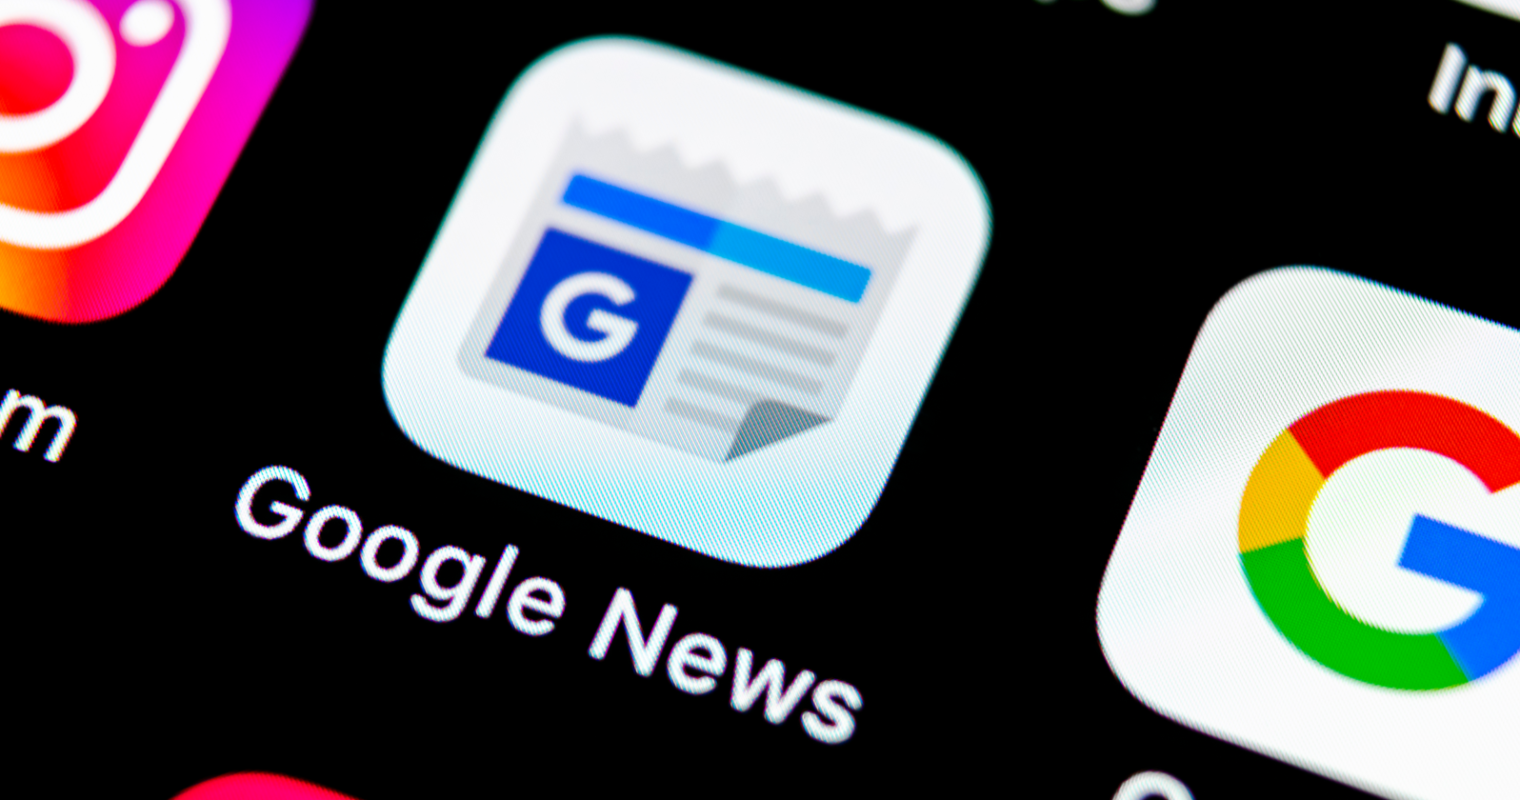 Google News Optimization: How to Boost Your Site's Visibility & Traffic